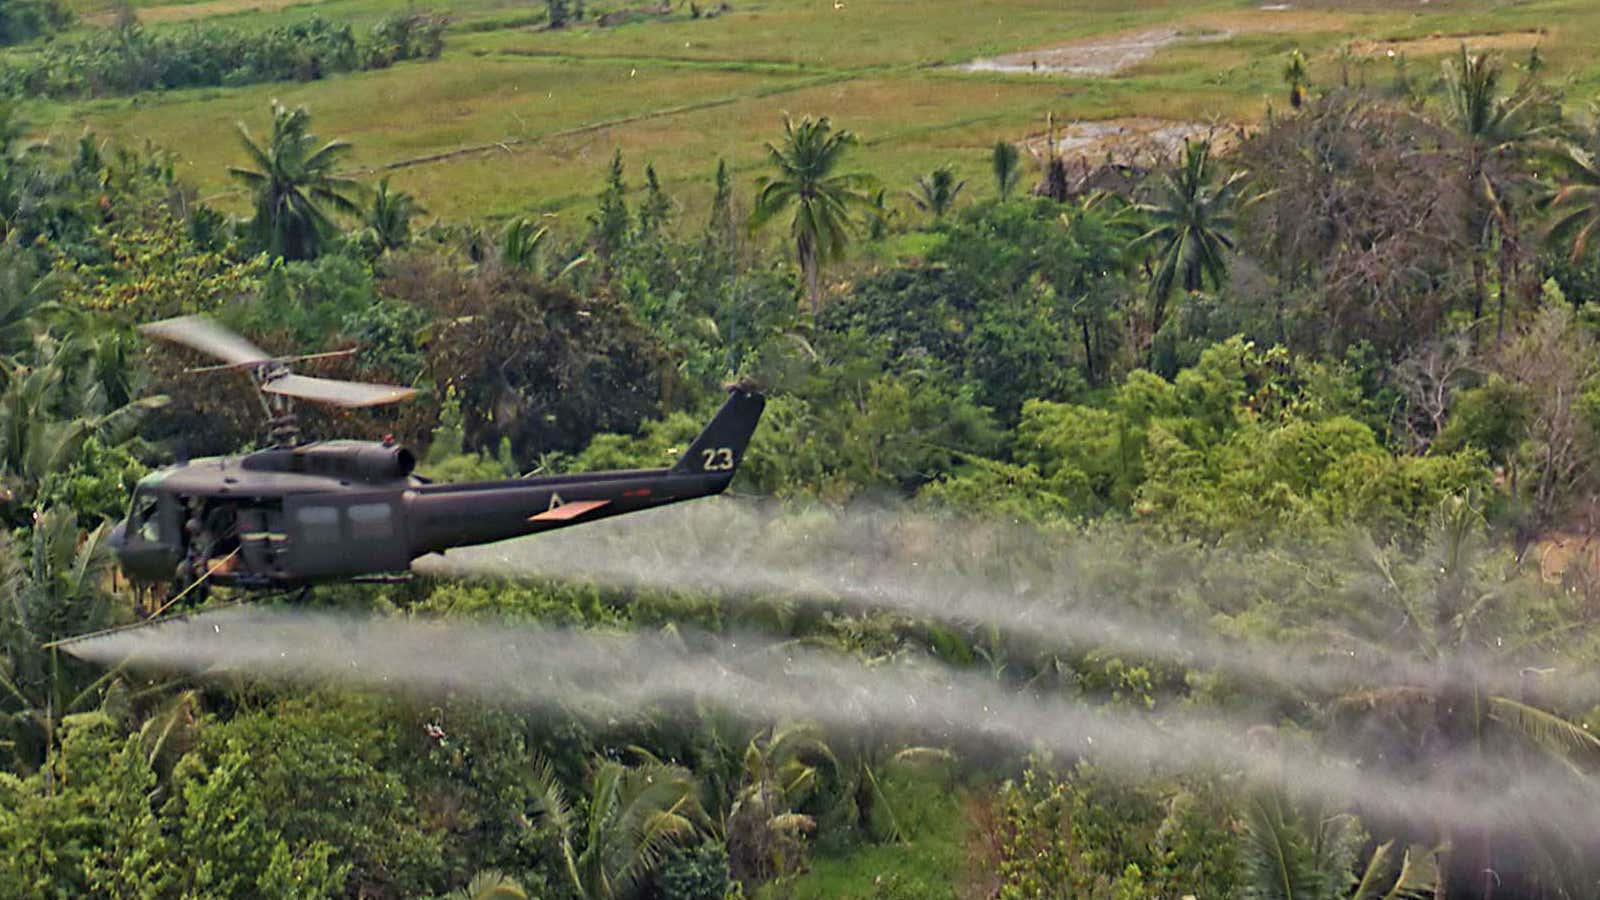 An American helicopter sprays Agent Orange, a chemical that still lingers in Vietnam’s soil